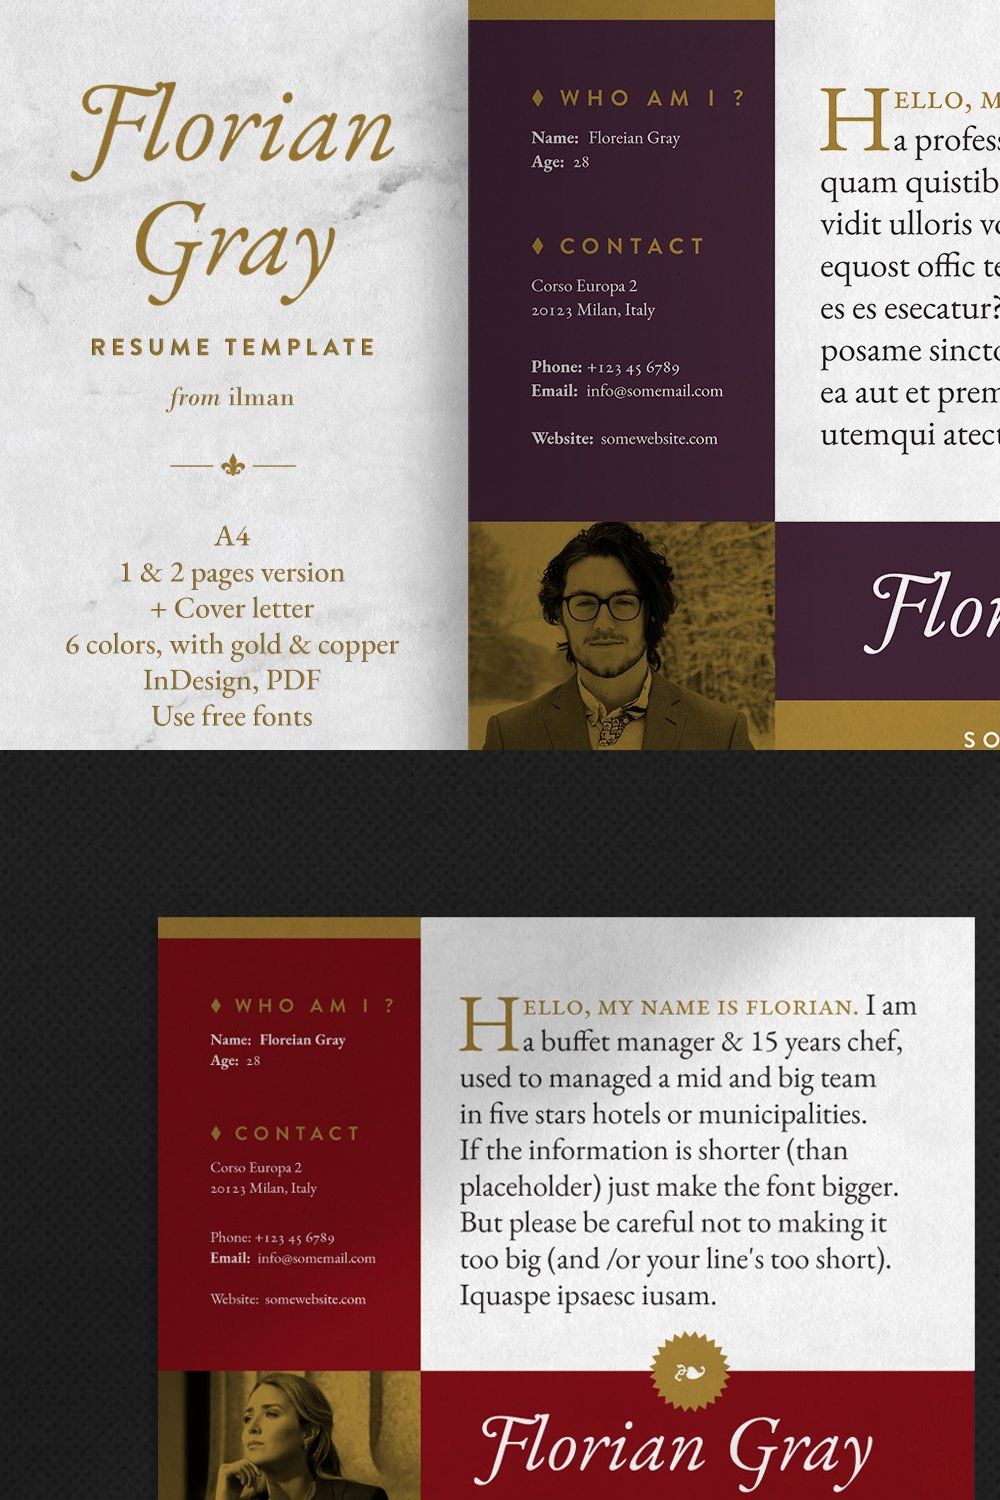 Florian Gray - Resume Template pinterest preview image.